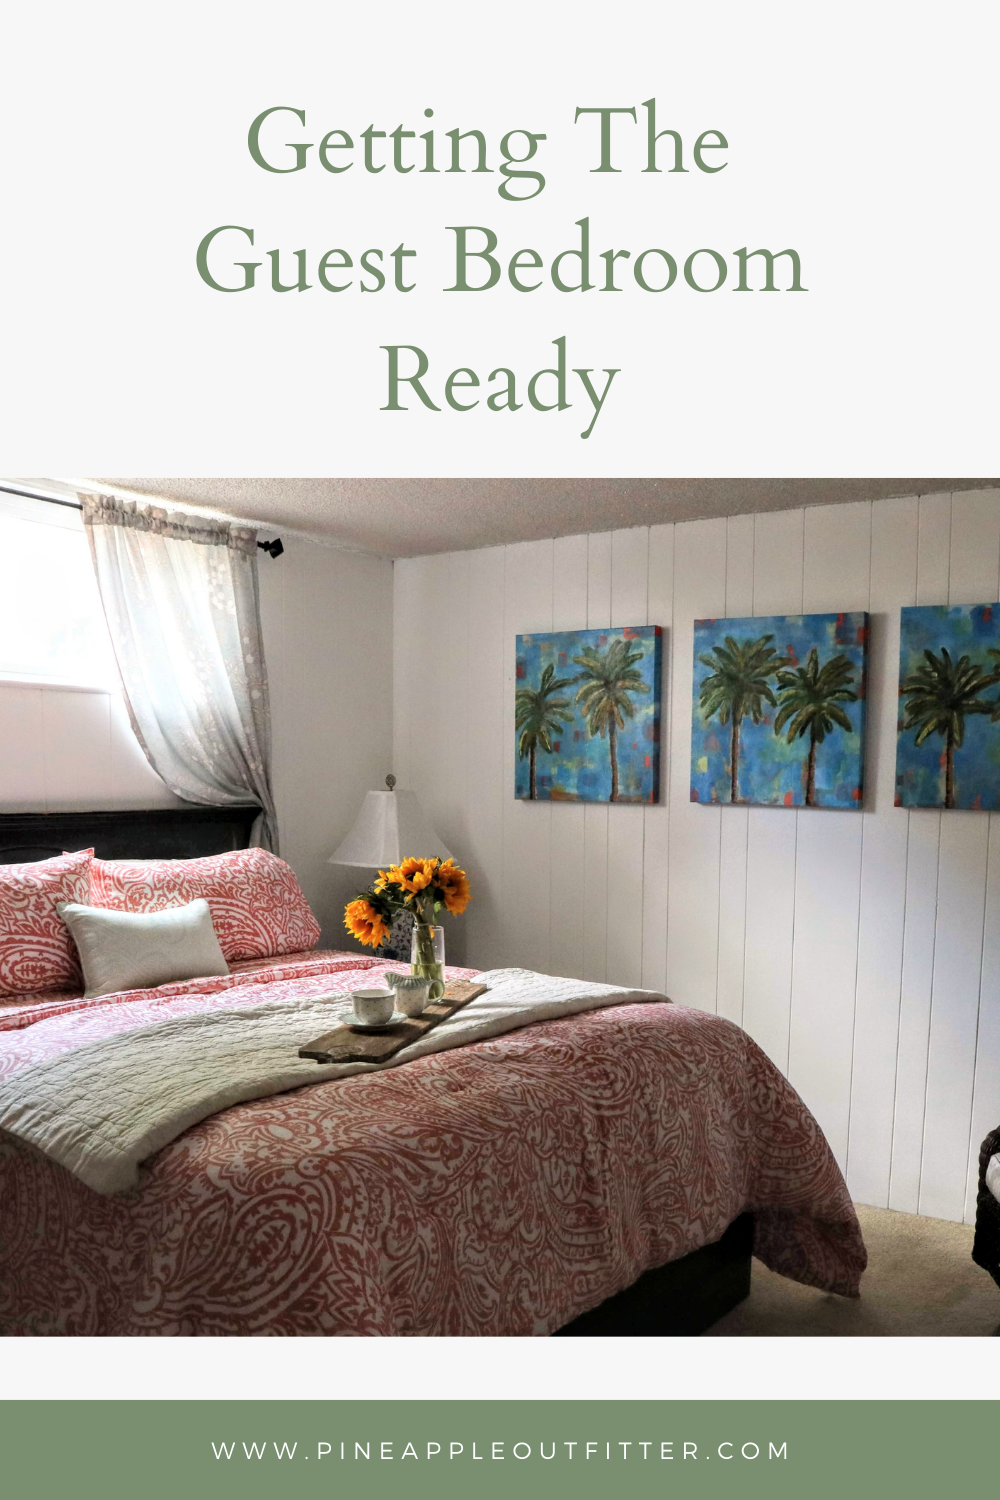 Getting the Guest Bedroom Ready